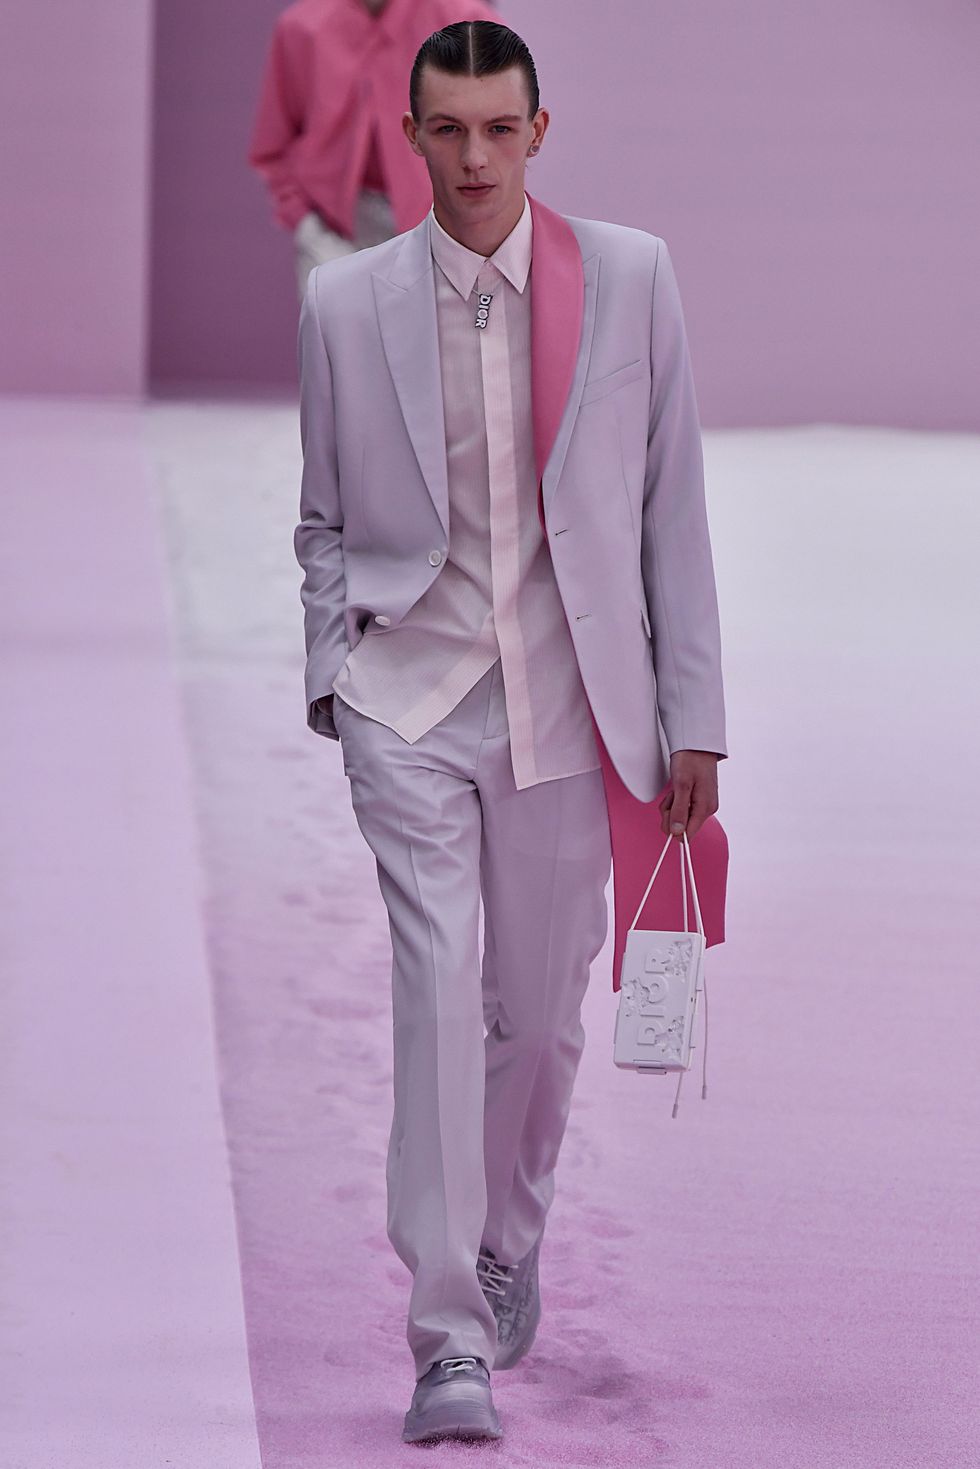 Fashion Week Guest seen wearing a full pink Louis Vuitton Look, pink  News Photo - Getty Images